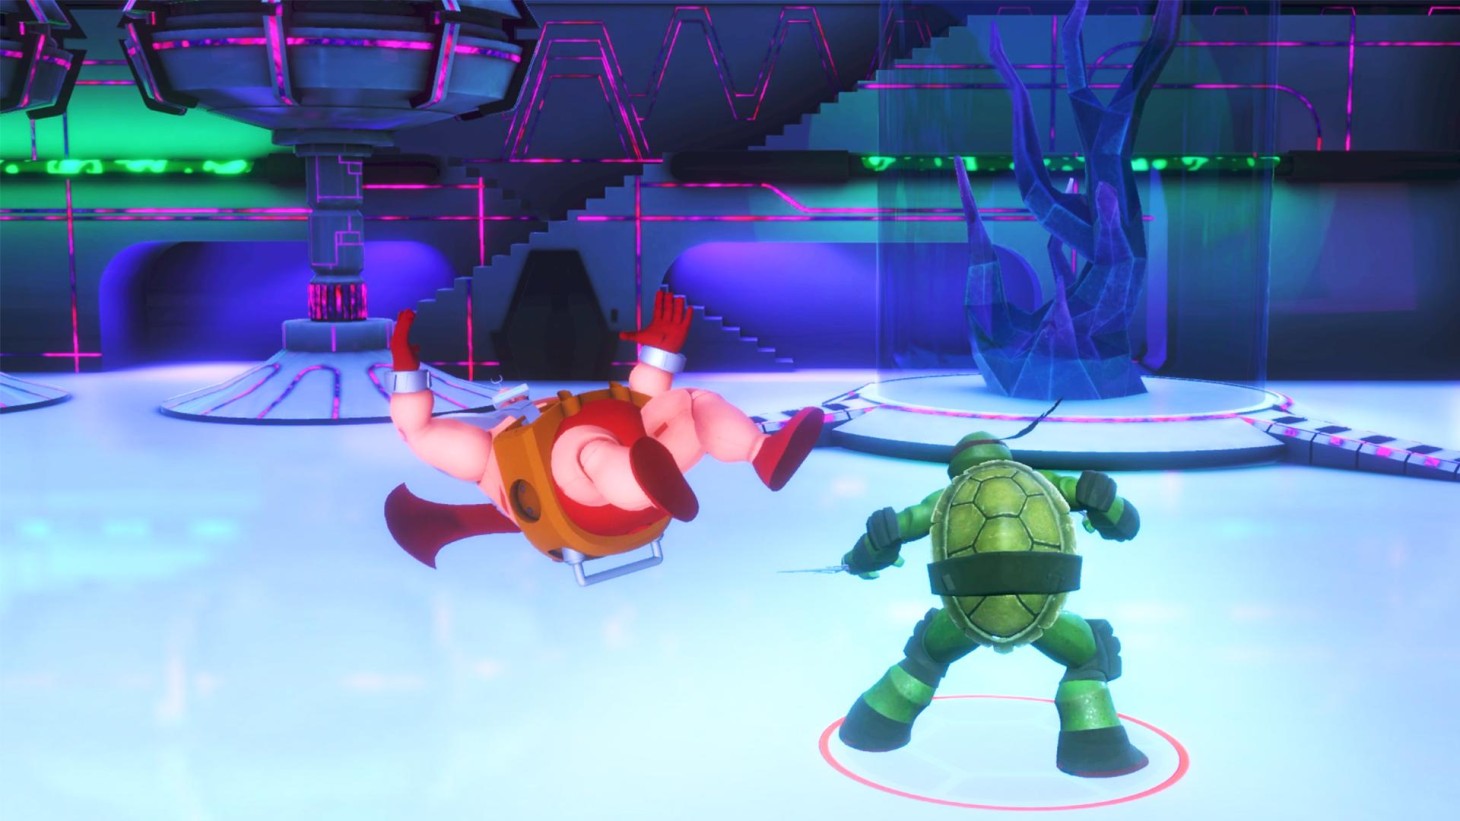 Teenage Mutant Ninja Turtles Arcade: Wrath of the Mutants Review – Better Left In The Sewers